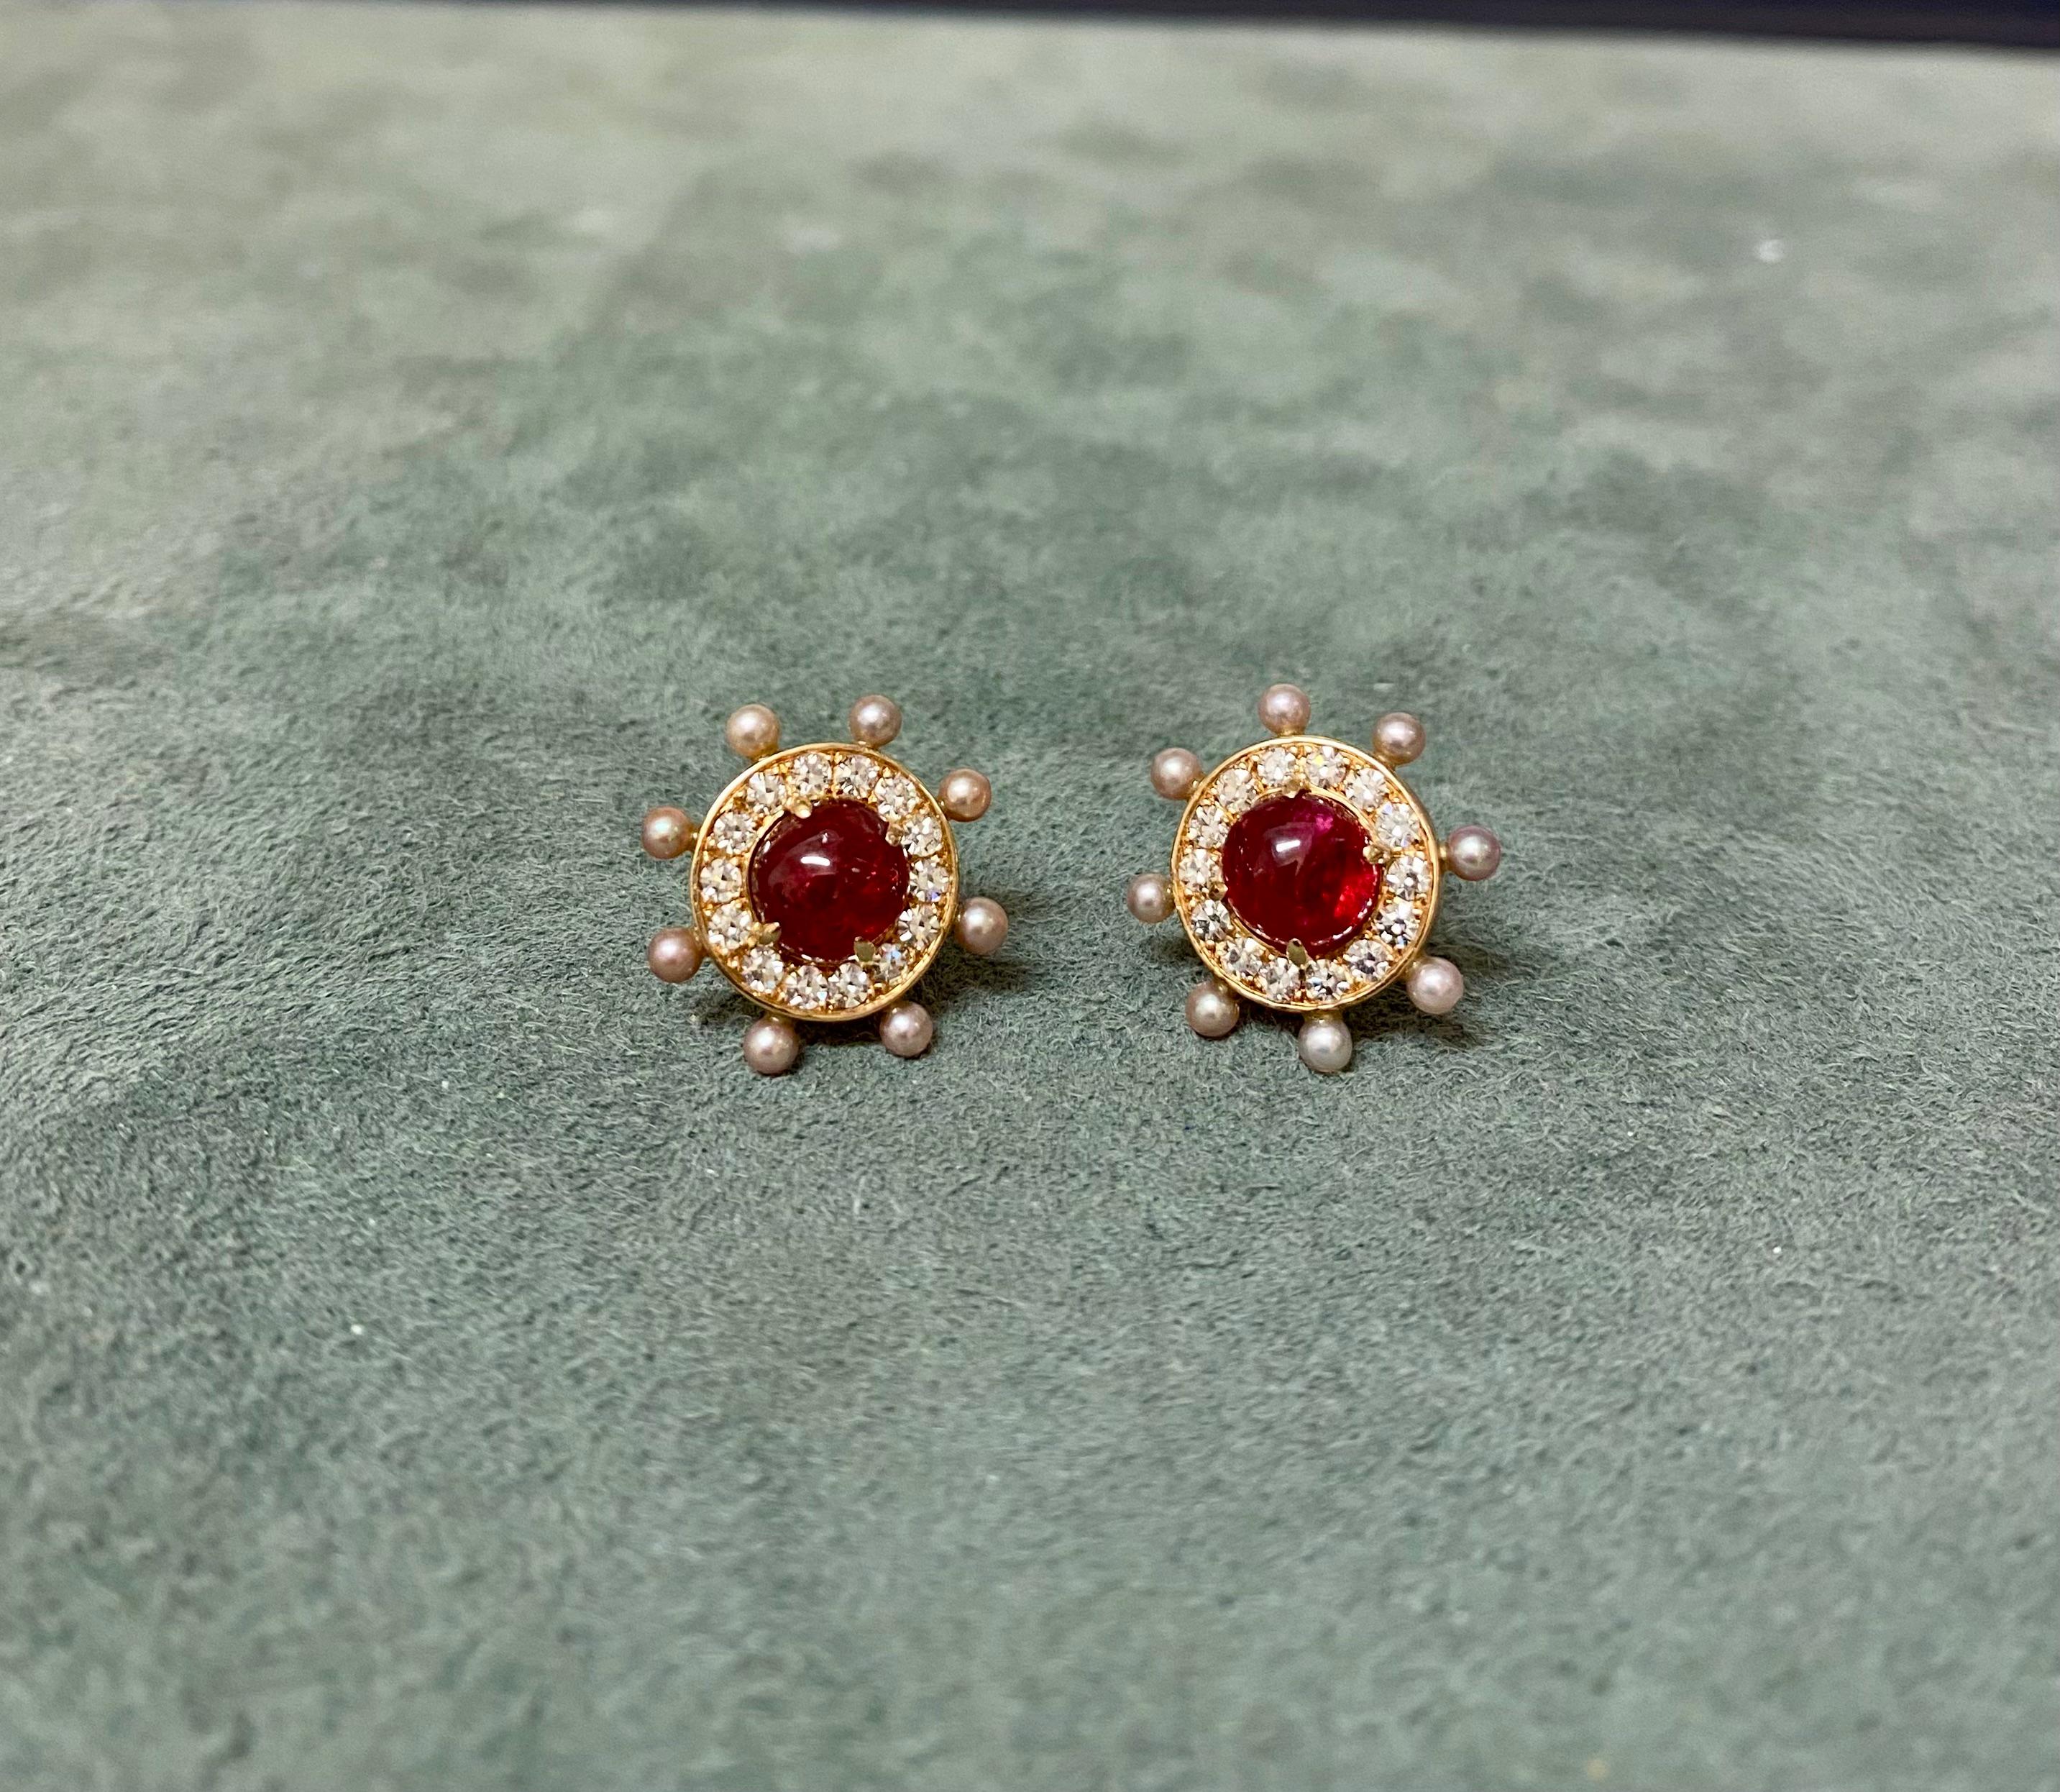 Two red cabochon cut spinels set in 18k red gold, with diamonds and natural pearls. The spinels weigh a total of 3.98cts, the 16 natural pearls 1.46cts, and the 28 single cut diamonds weight a total of 0.61ct. 